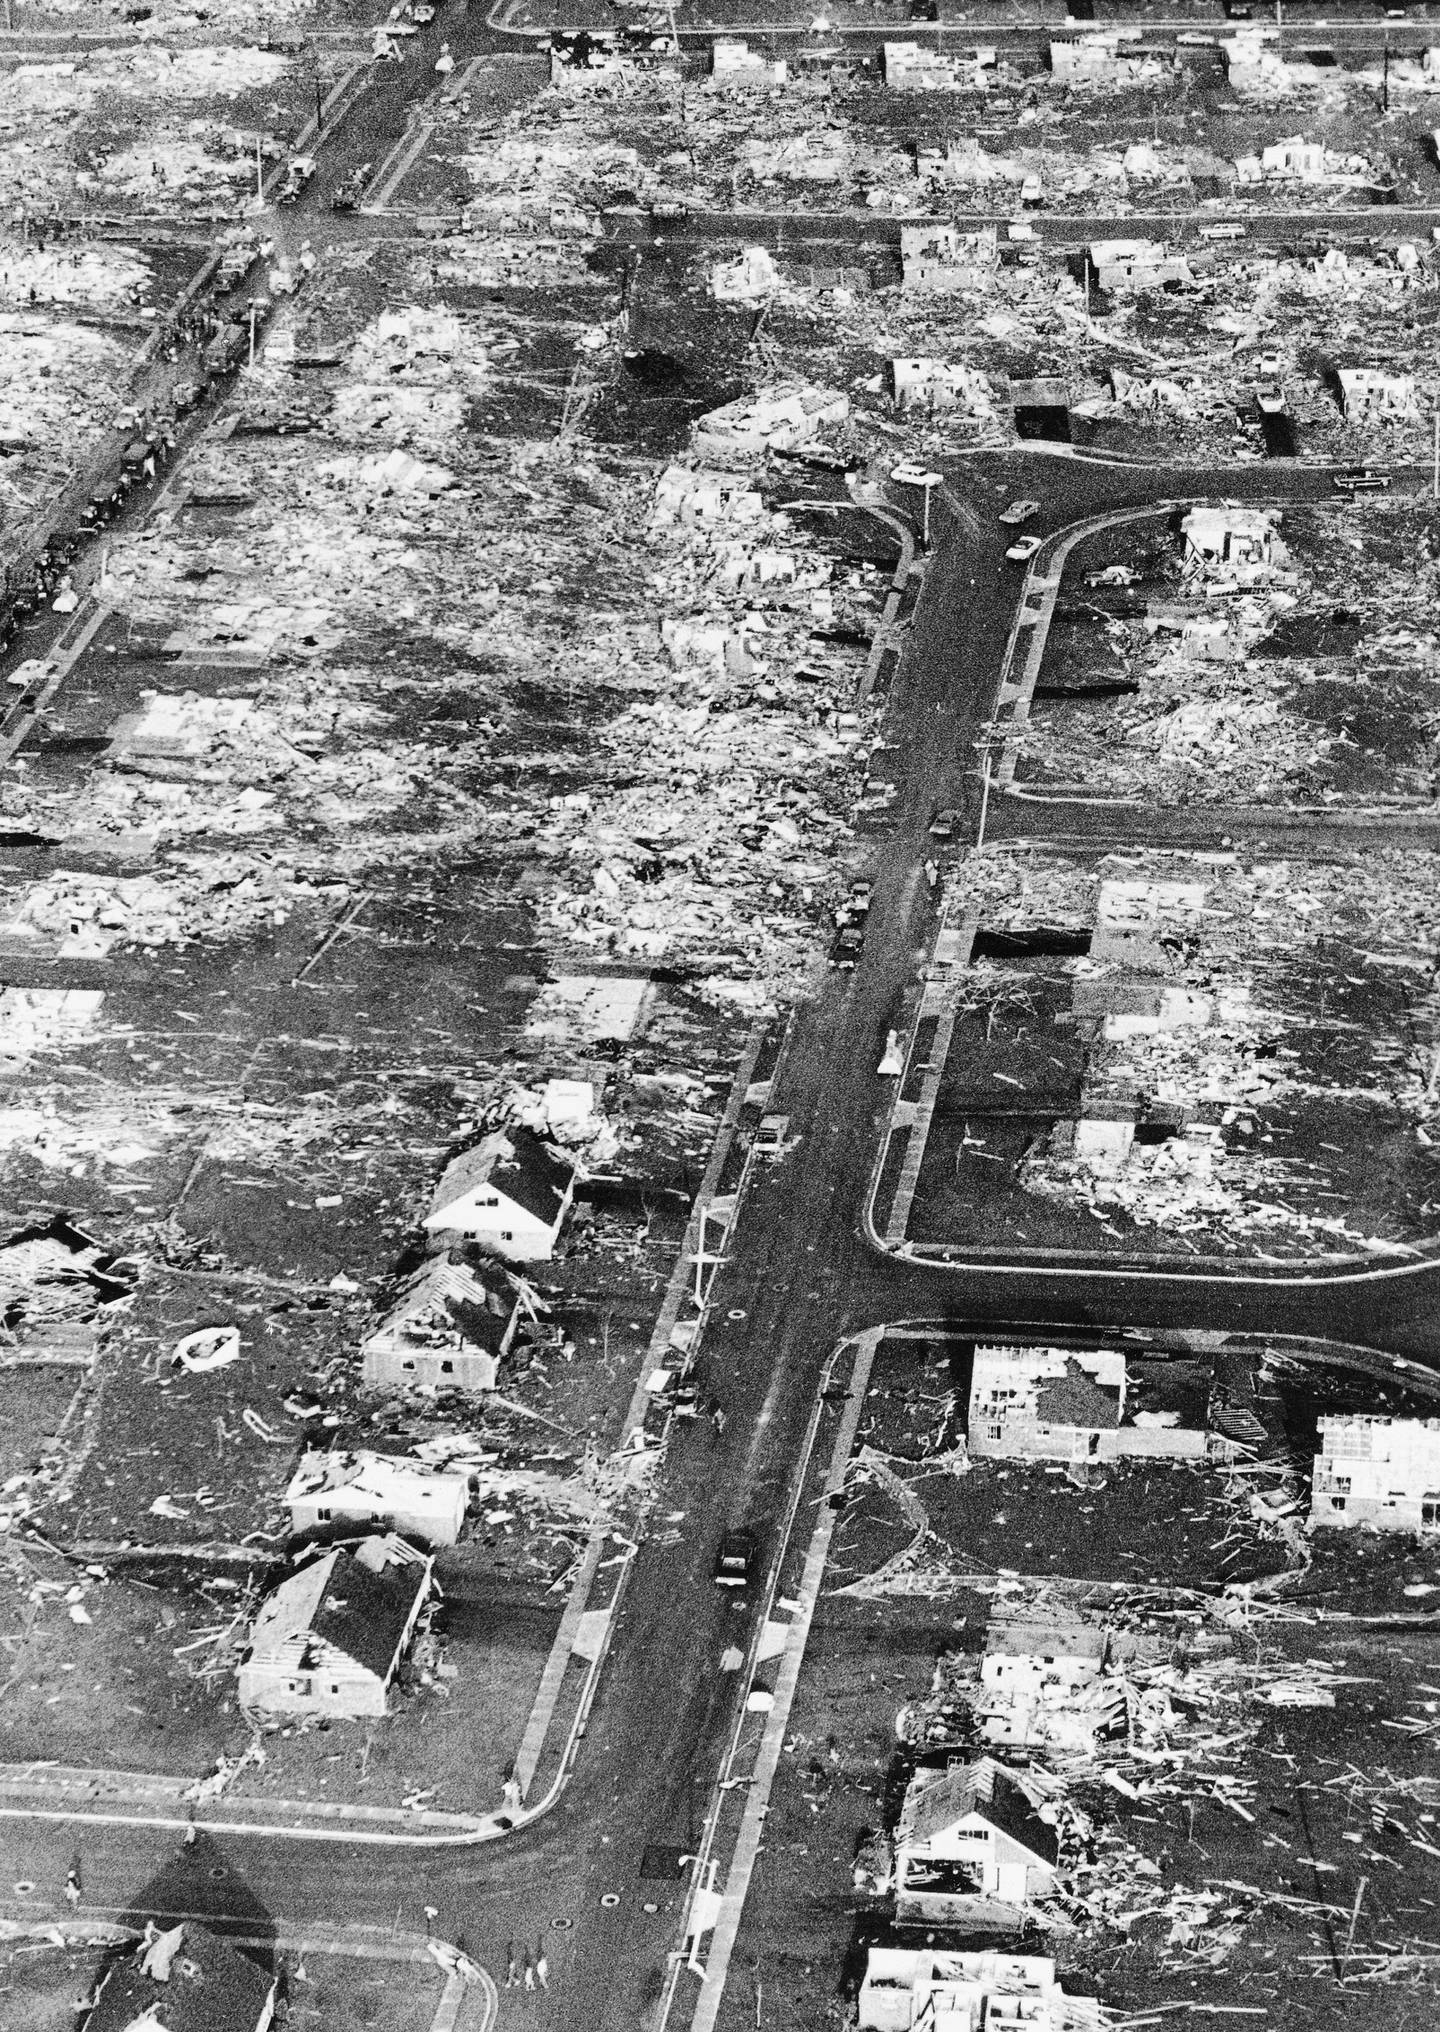 Homes and businesses are demolished after tornadoes hit Xenia, Ohio, late Wednesday, April 4, 1974. The deadly tornado killed 32 people, injured hundreds and leveled half the city of 25,000. Nearby Wilberforce was also hit hard. As the Watergate scandal unfolded in Washington, President Richard Nixon made an unannounced visit to Xenia to tour the damage. Xenia's was the deadliest and most powerful tornado of the 1974 Super Outbreak.